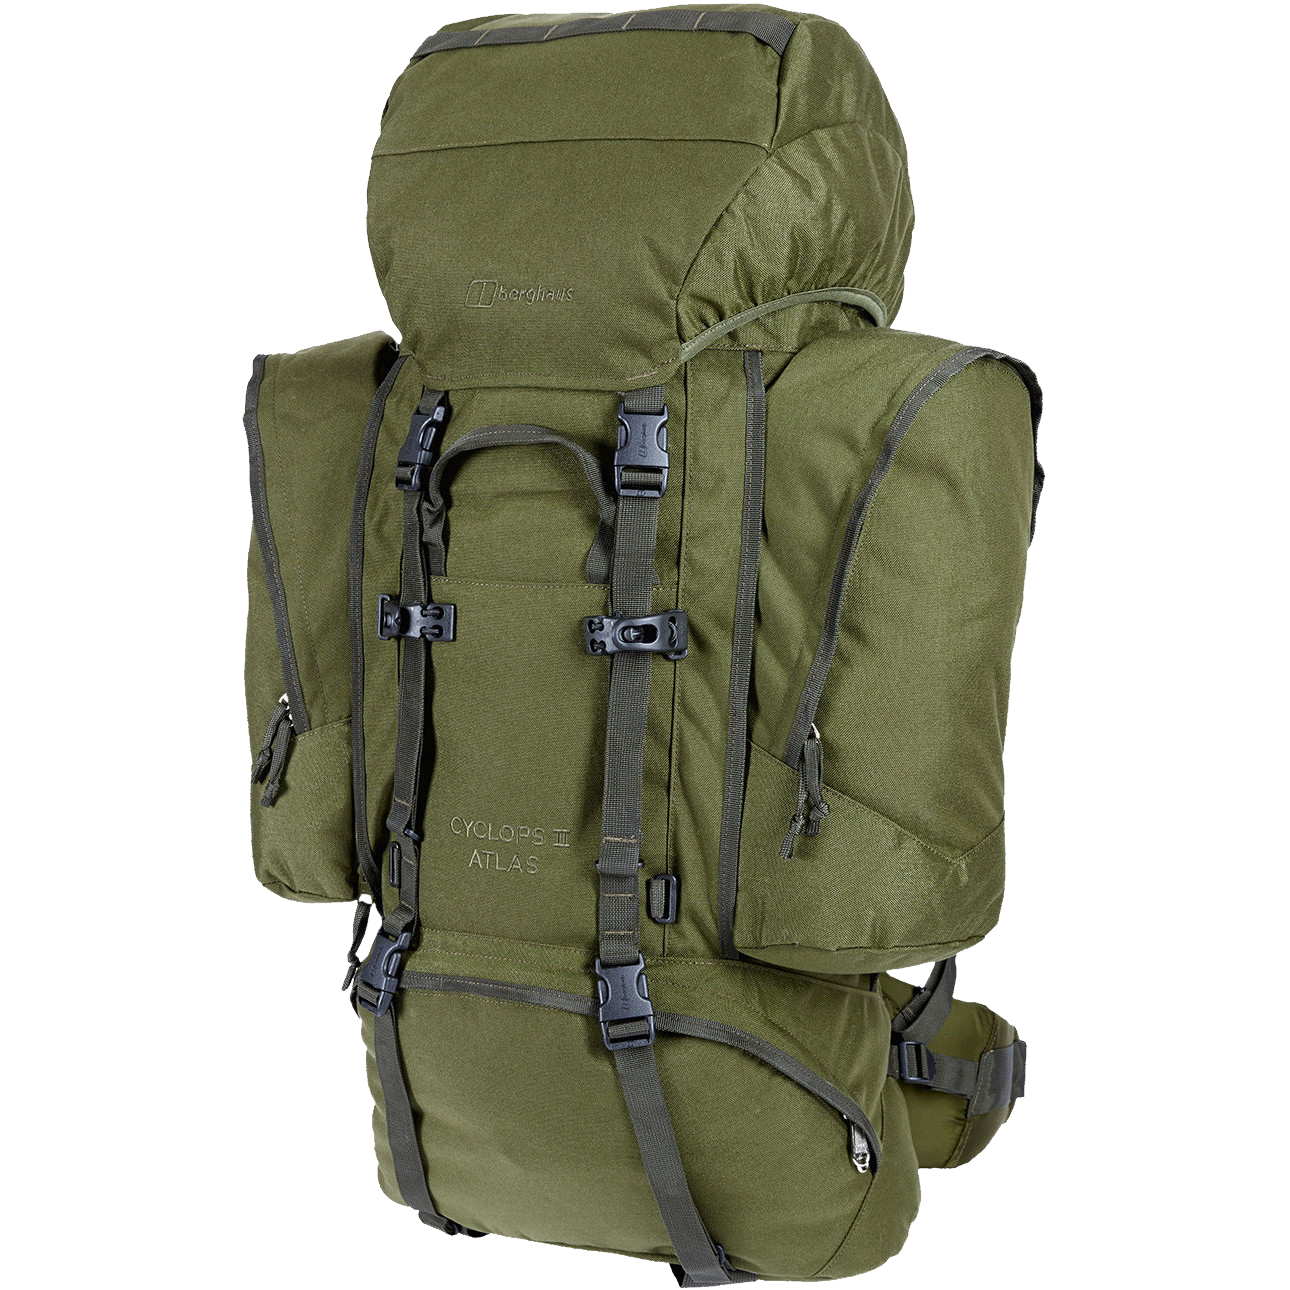 Military Backpack Png Image - Backpack, Transparent background PNG HD thumbnail